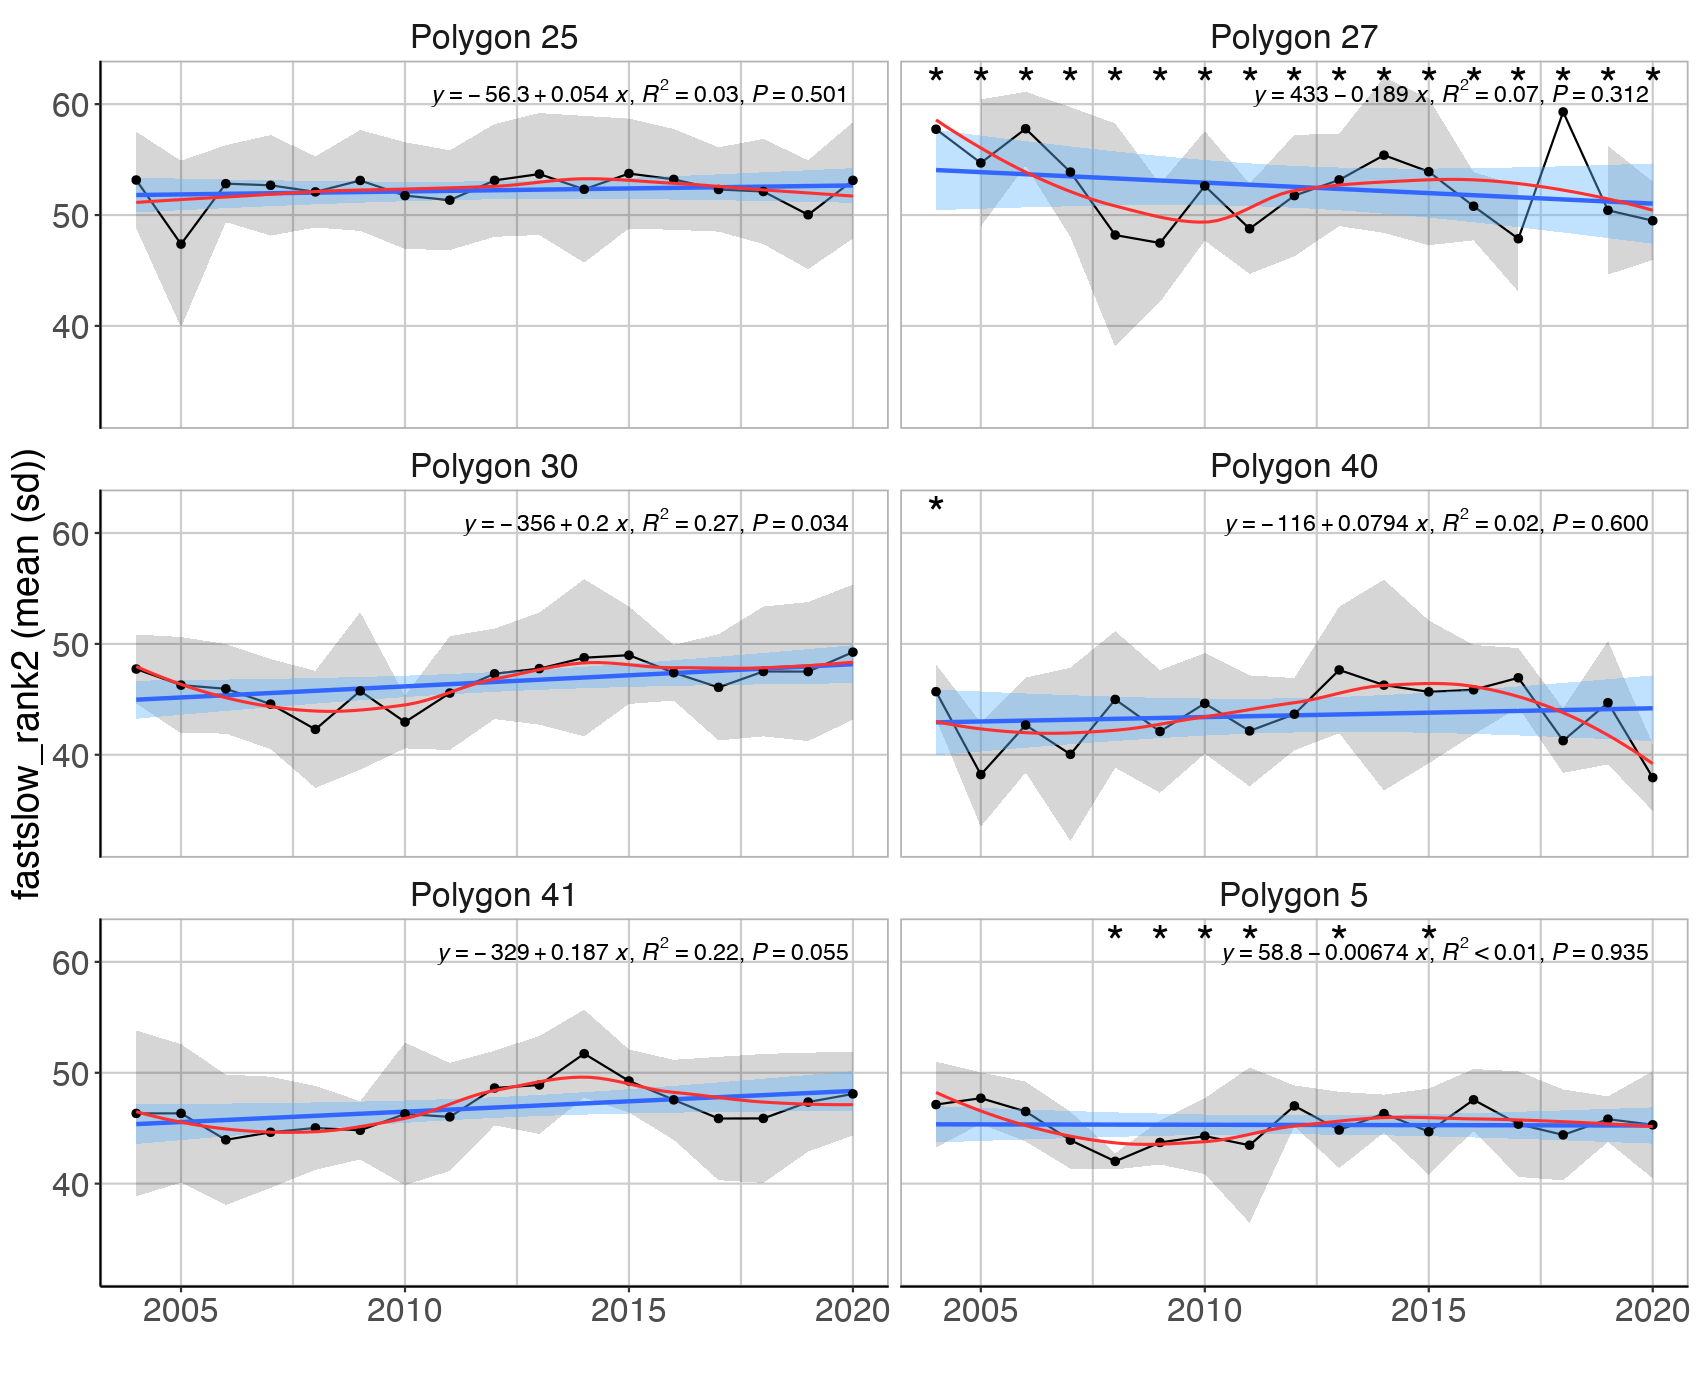 Figure S.15.6 Mean (± sd) log biomass weighted fast-slow life history rank value excluding cod in the Sub-Arctic part of the Barents Sea (Black dots and grey shading). High values translate to slow life history strategy. Linear regression fit with 95% CI is shown in blue, and the statistical results are given in the top of each plot. A local smoother is added in red to assist visual interpretation of non-linear changes during the period. Stars denote years with low sample size (< 5 trawls).